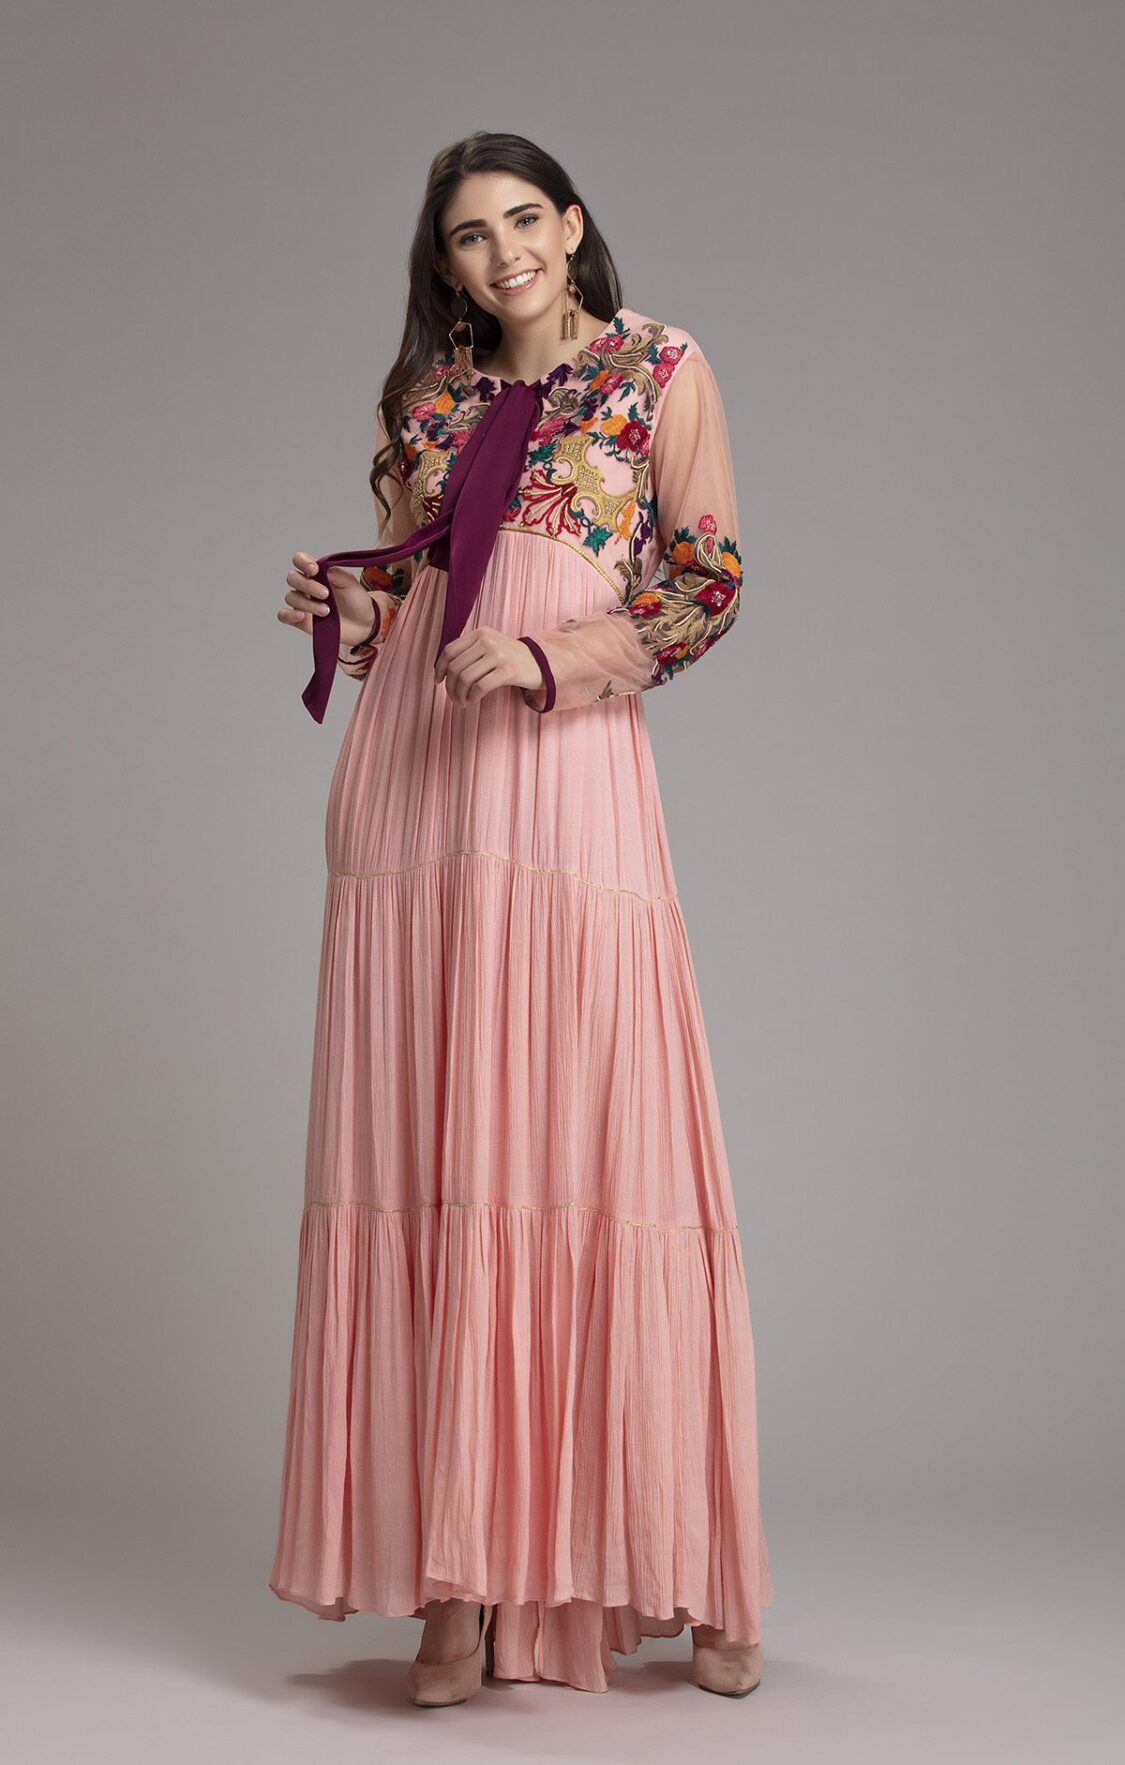 Embroidered Tiered Cotton Maxi Dress